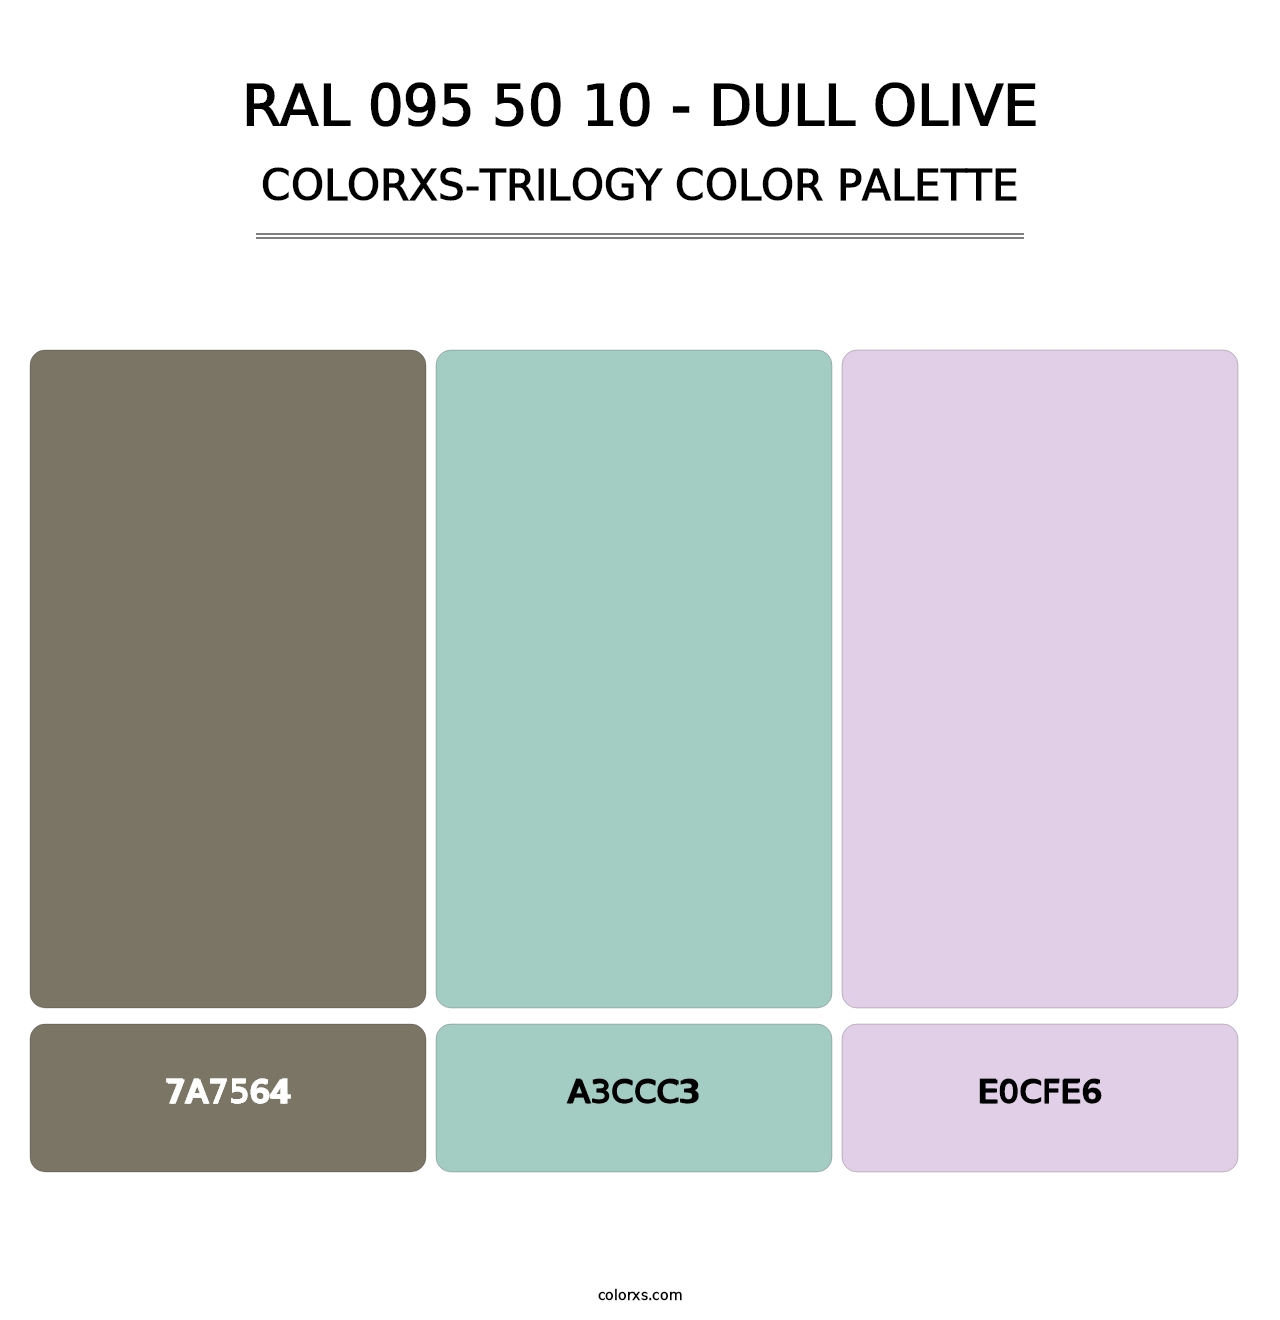 RAL 095 50 10 - Dull Olive - Colorxs Trilogy Palette